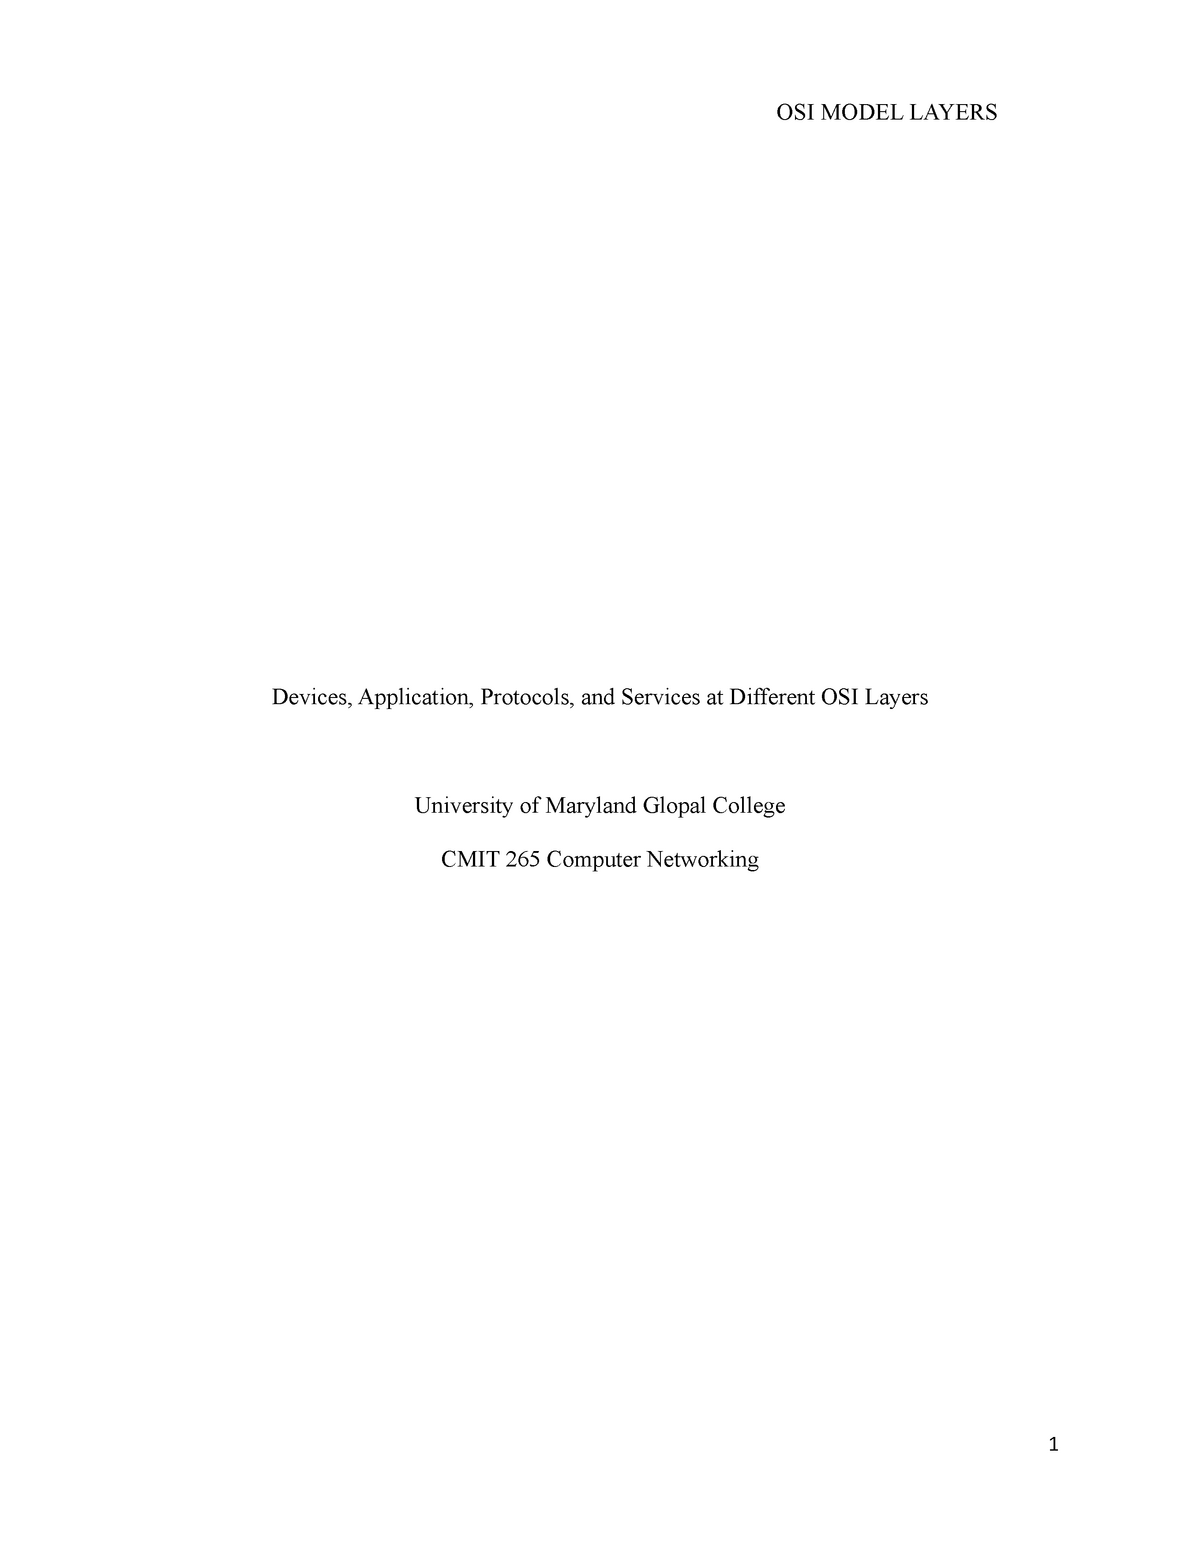 computer networks research papers